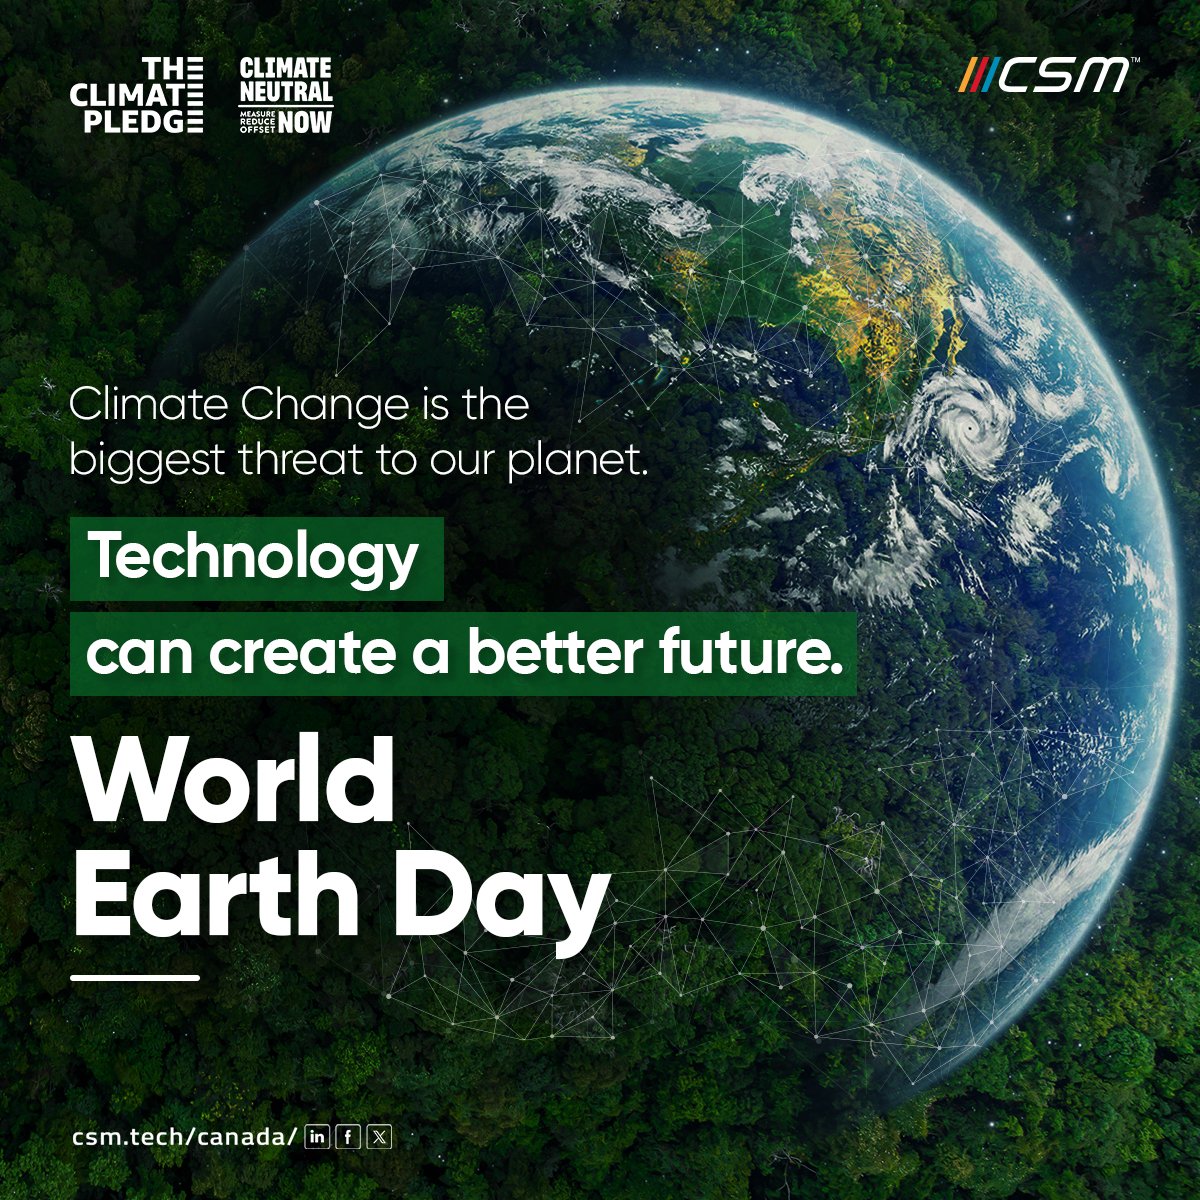 With technology, we can walk towards greener digital transformations for sustainable future.   

Because every action counts in preserving our shared home!          

#WorldEarthDay #ClimateChangeNow #UNClimateChangeNow #TheClimatePledge #GreenTechnology #Canada #CSMTech